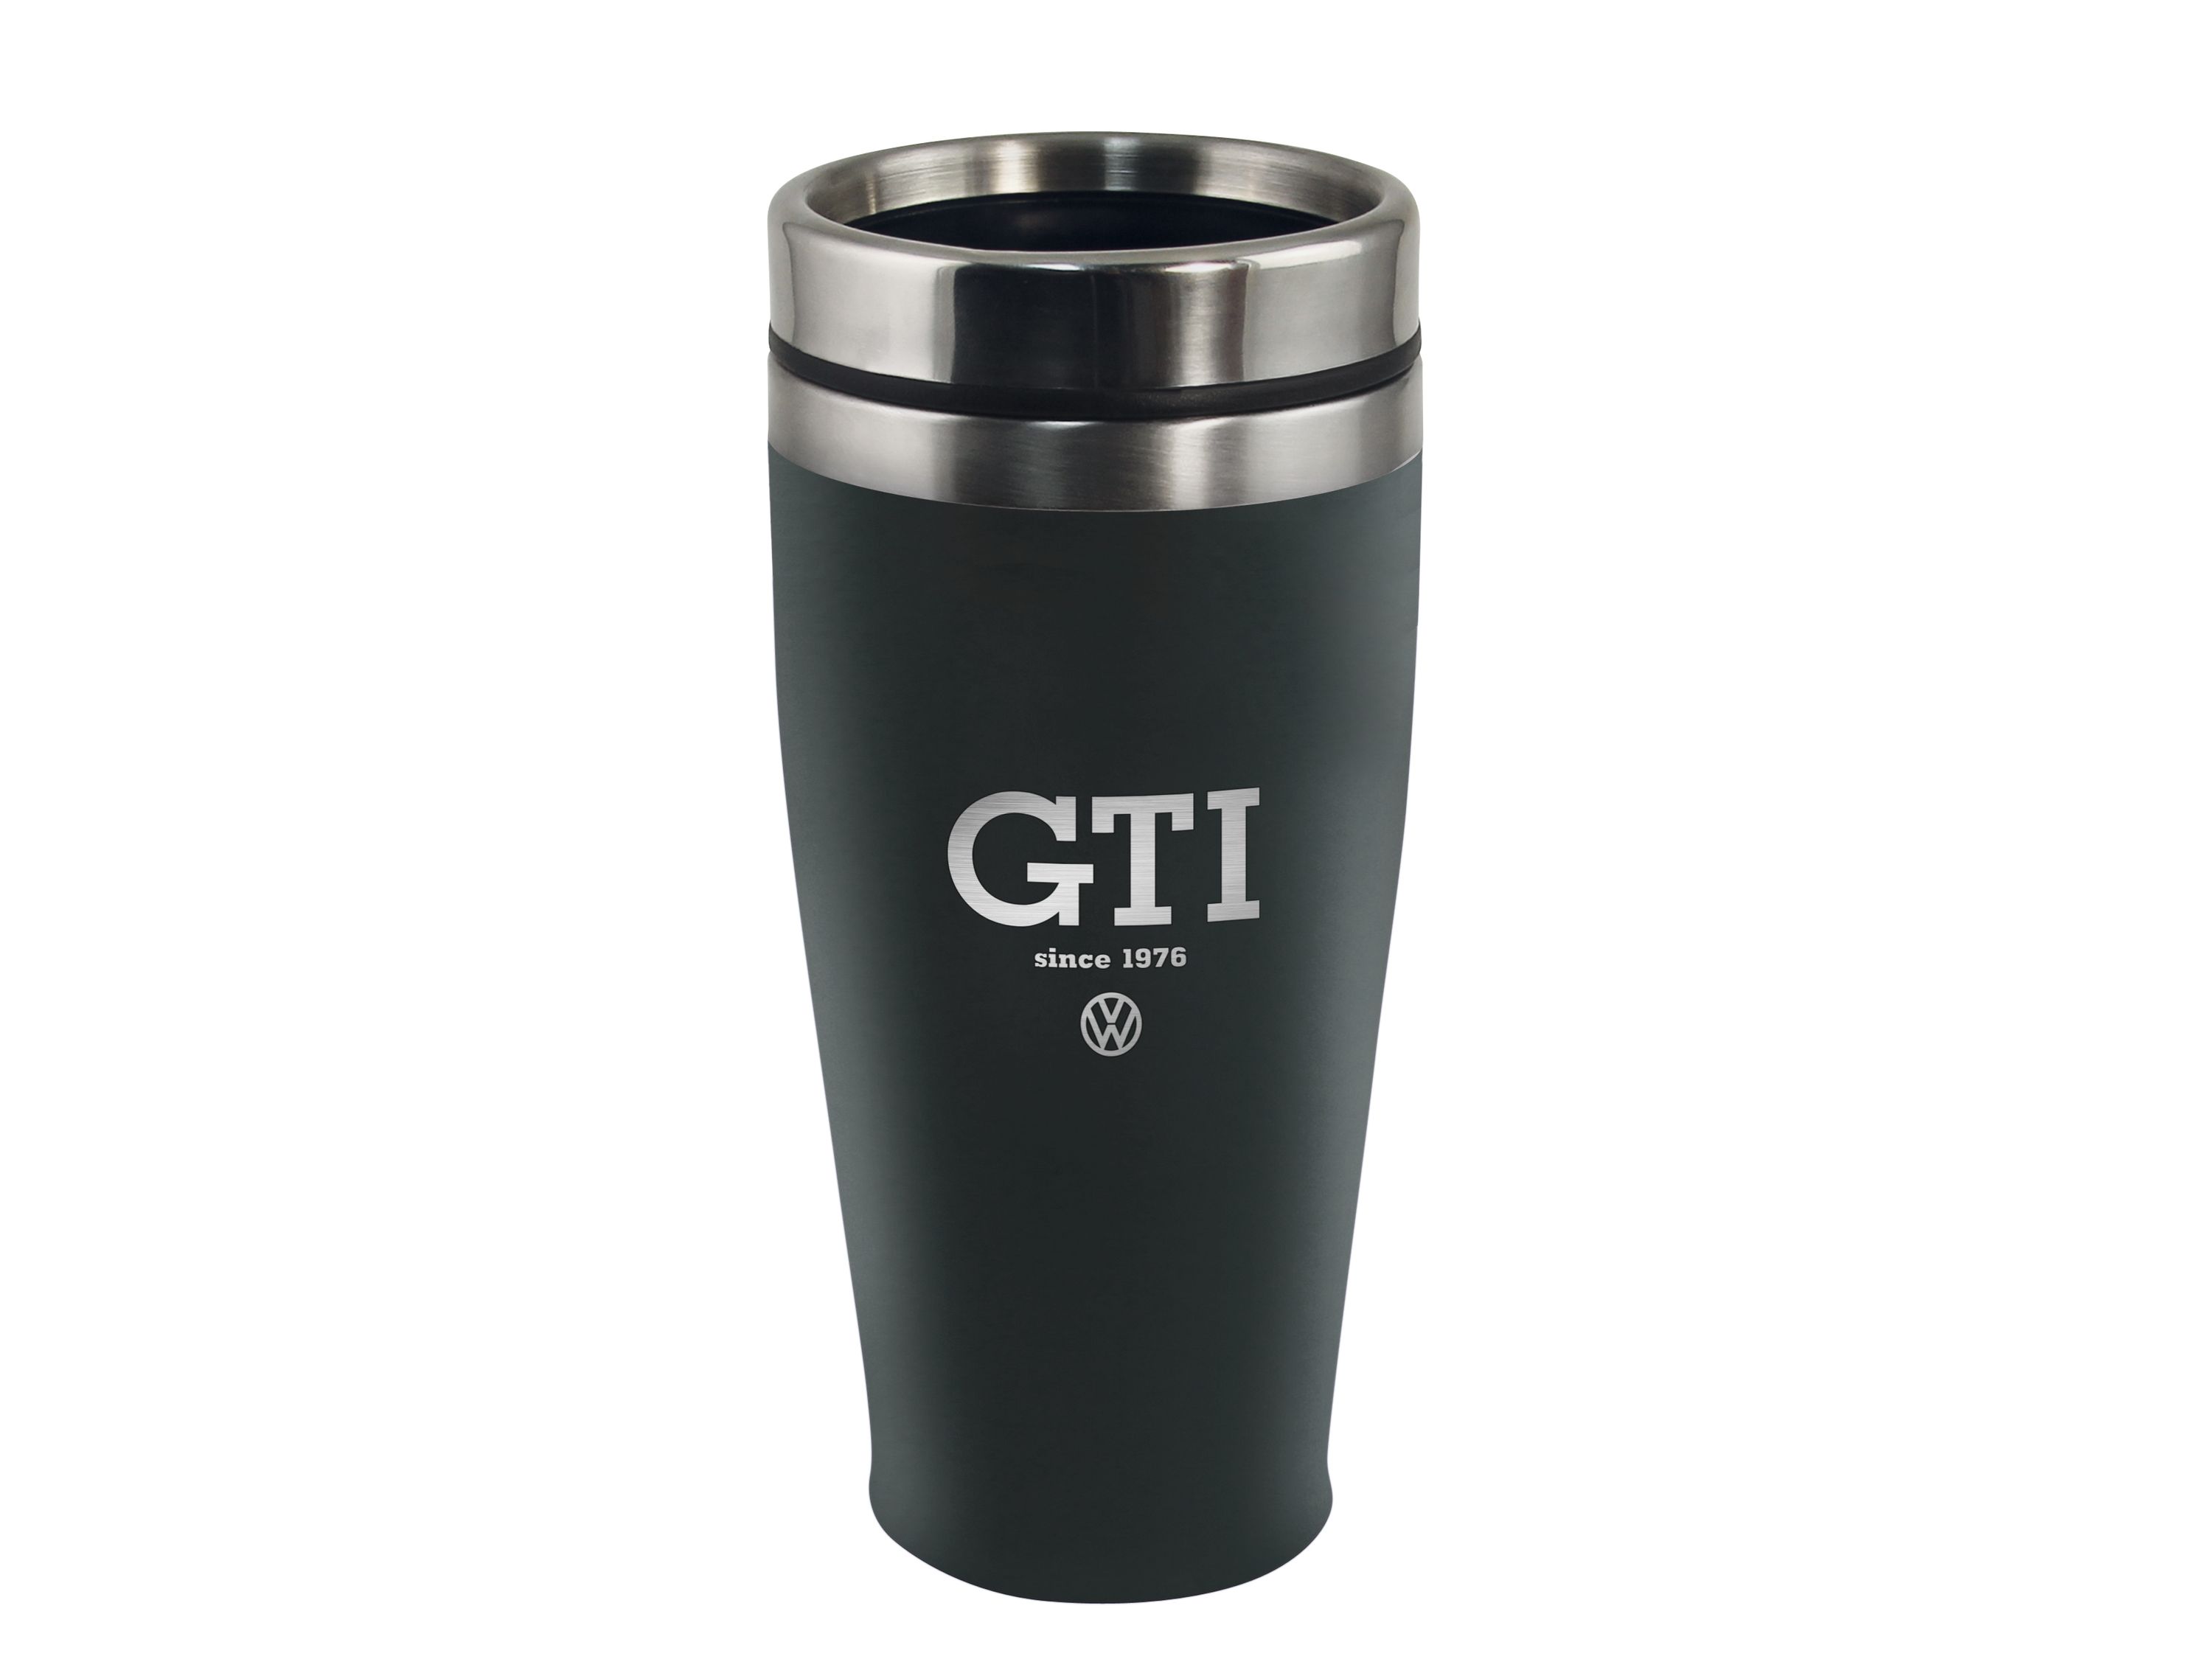 VW GTI stainless steel thermo mug, double walled, 450ml